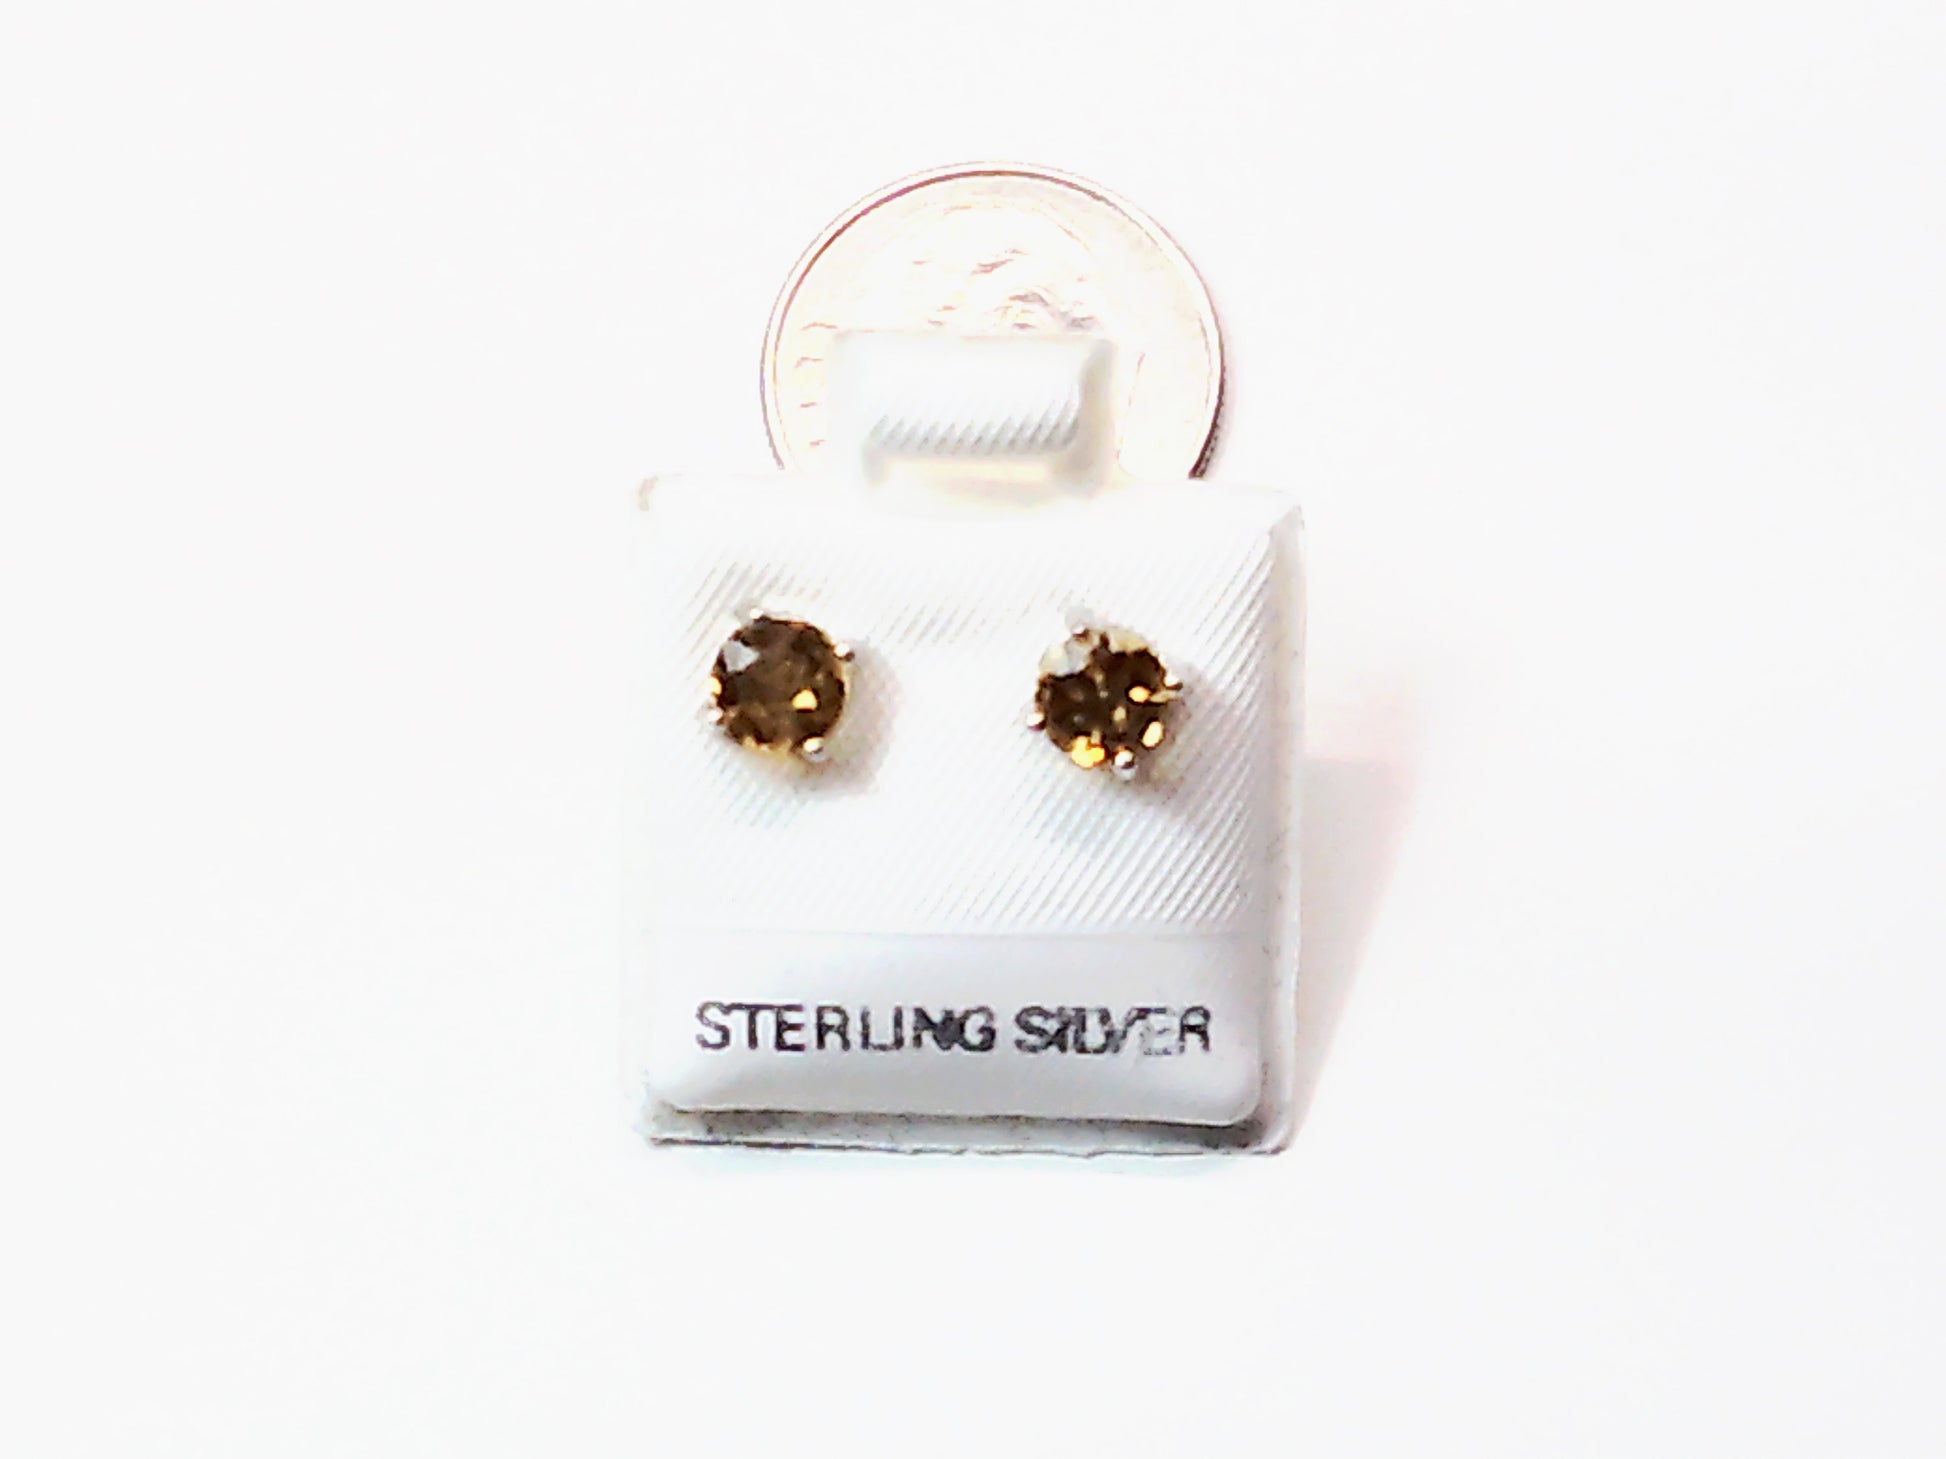 Birthstone genuine stones set in .925 silver stud earring - Providence silver gold jewelry usa